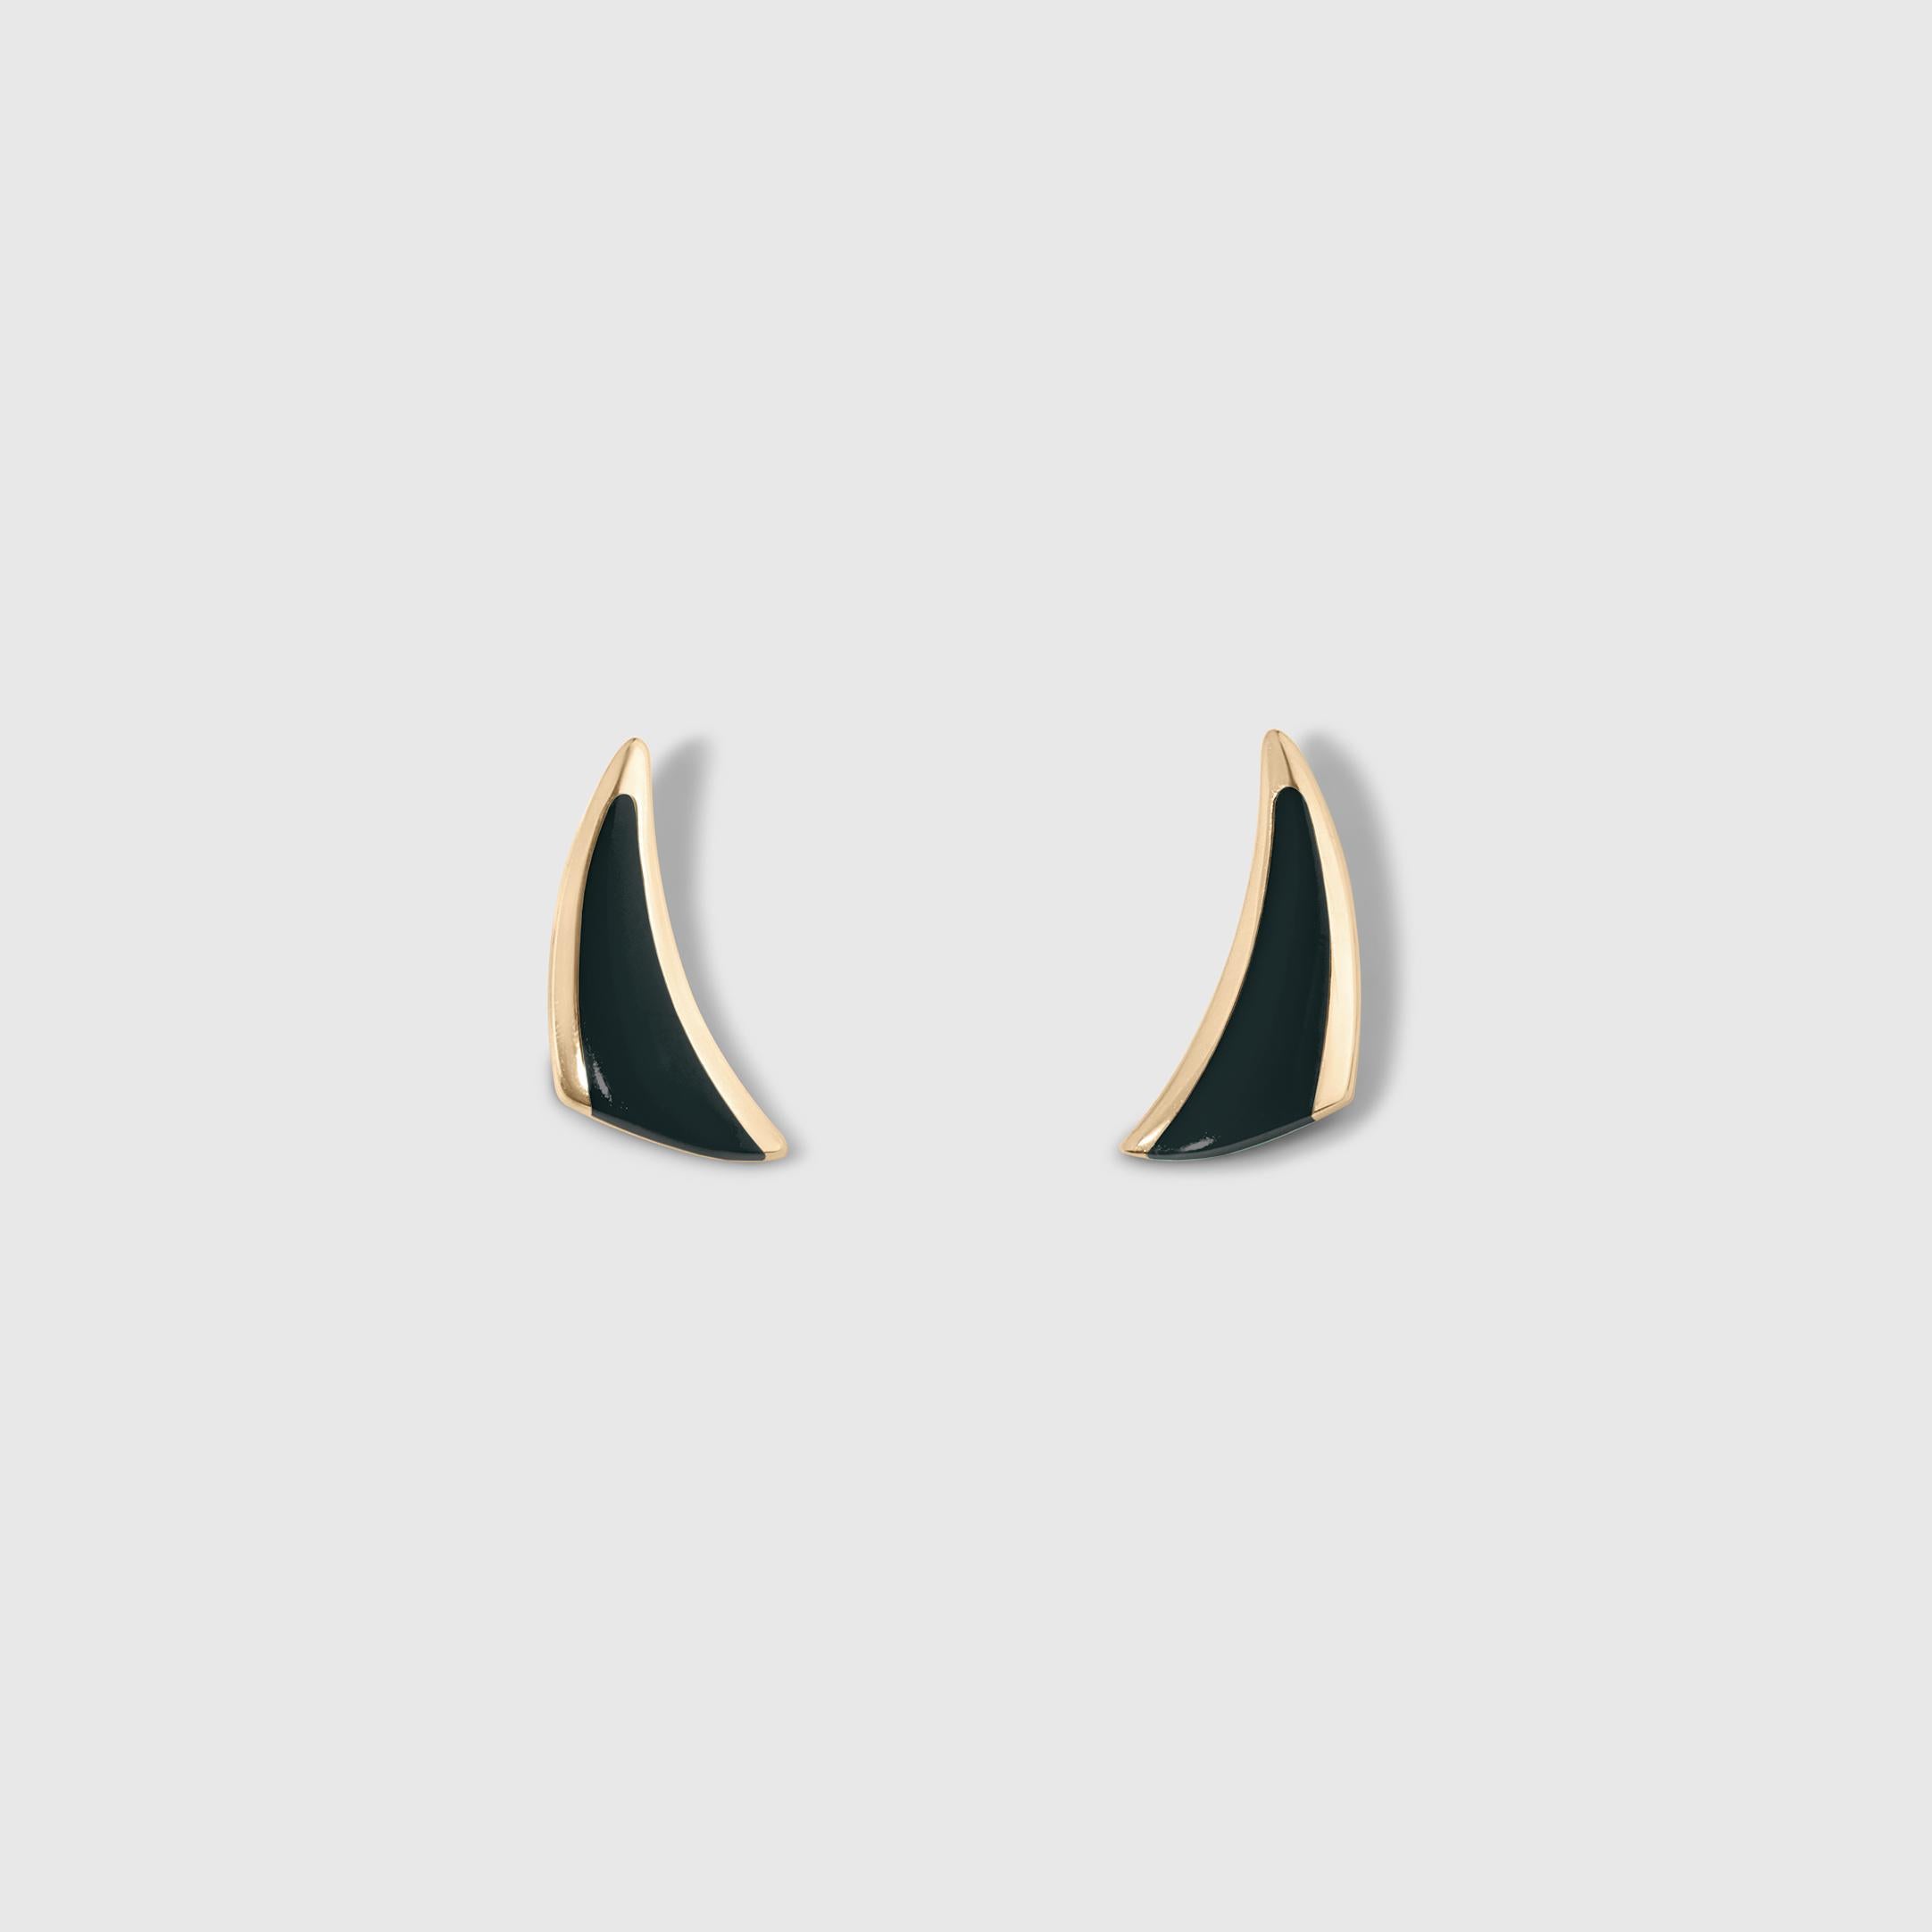 Triangle Post Earrings with Black Onyx Inlay, 14kt Yellow Gold by Kabana

All designs may be custom-ordered in many of Kabana’s stones, including: sleeping beauty turquoise, turquoise, four-star opal, five-star-high-grade opal, black onyx, red or